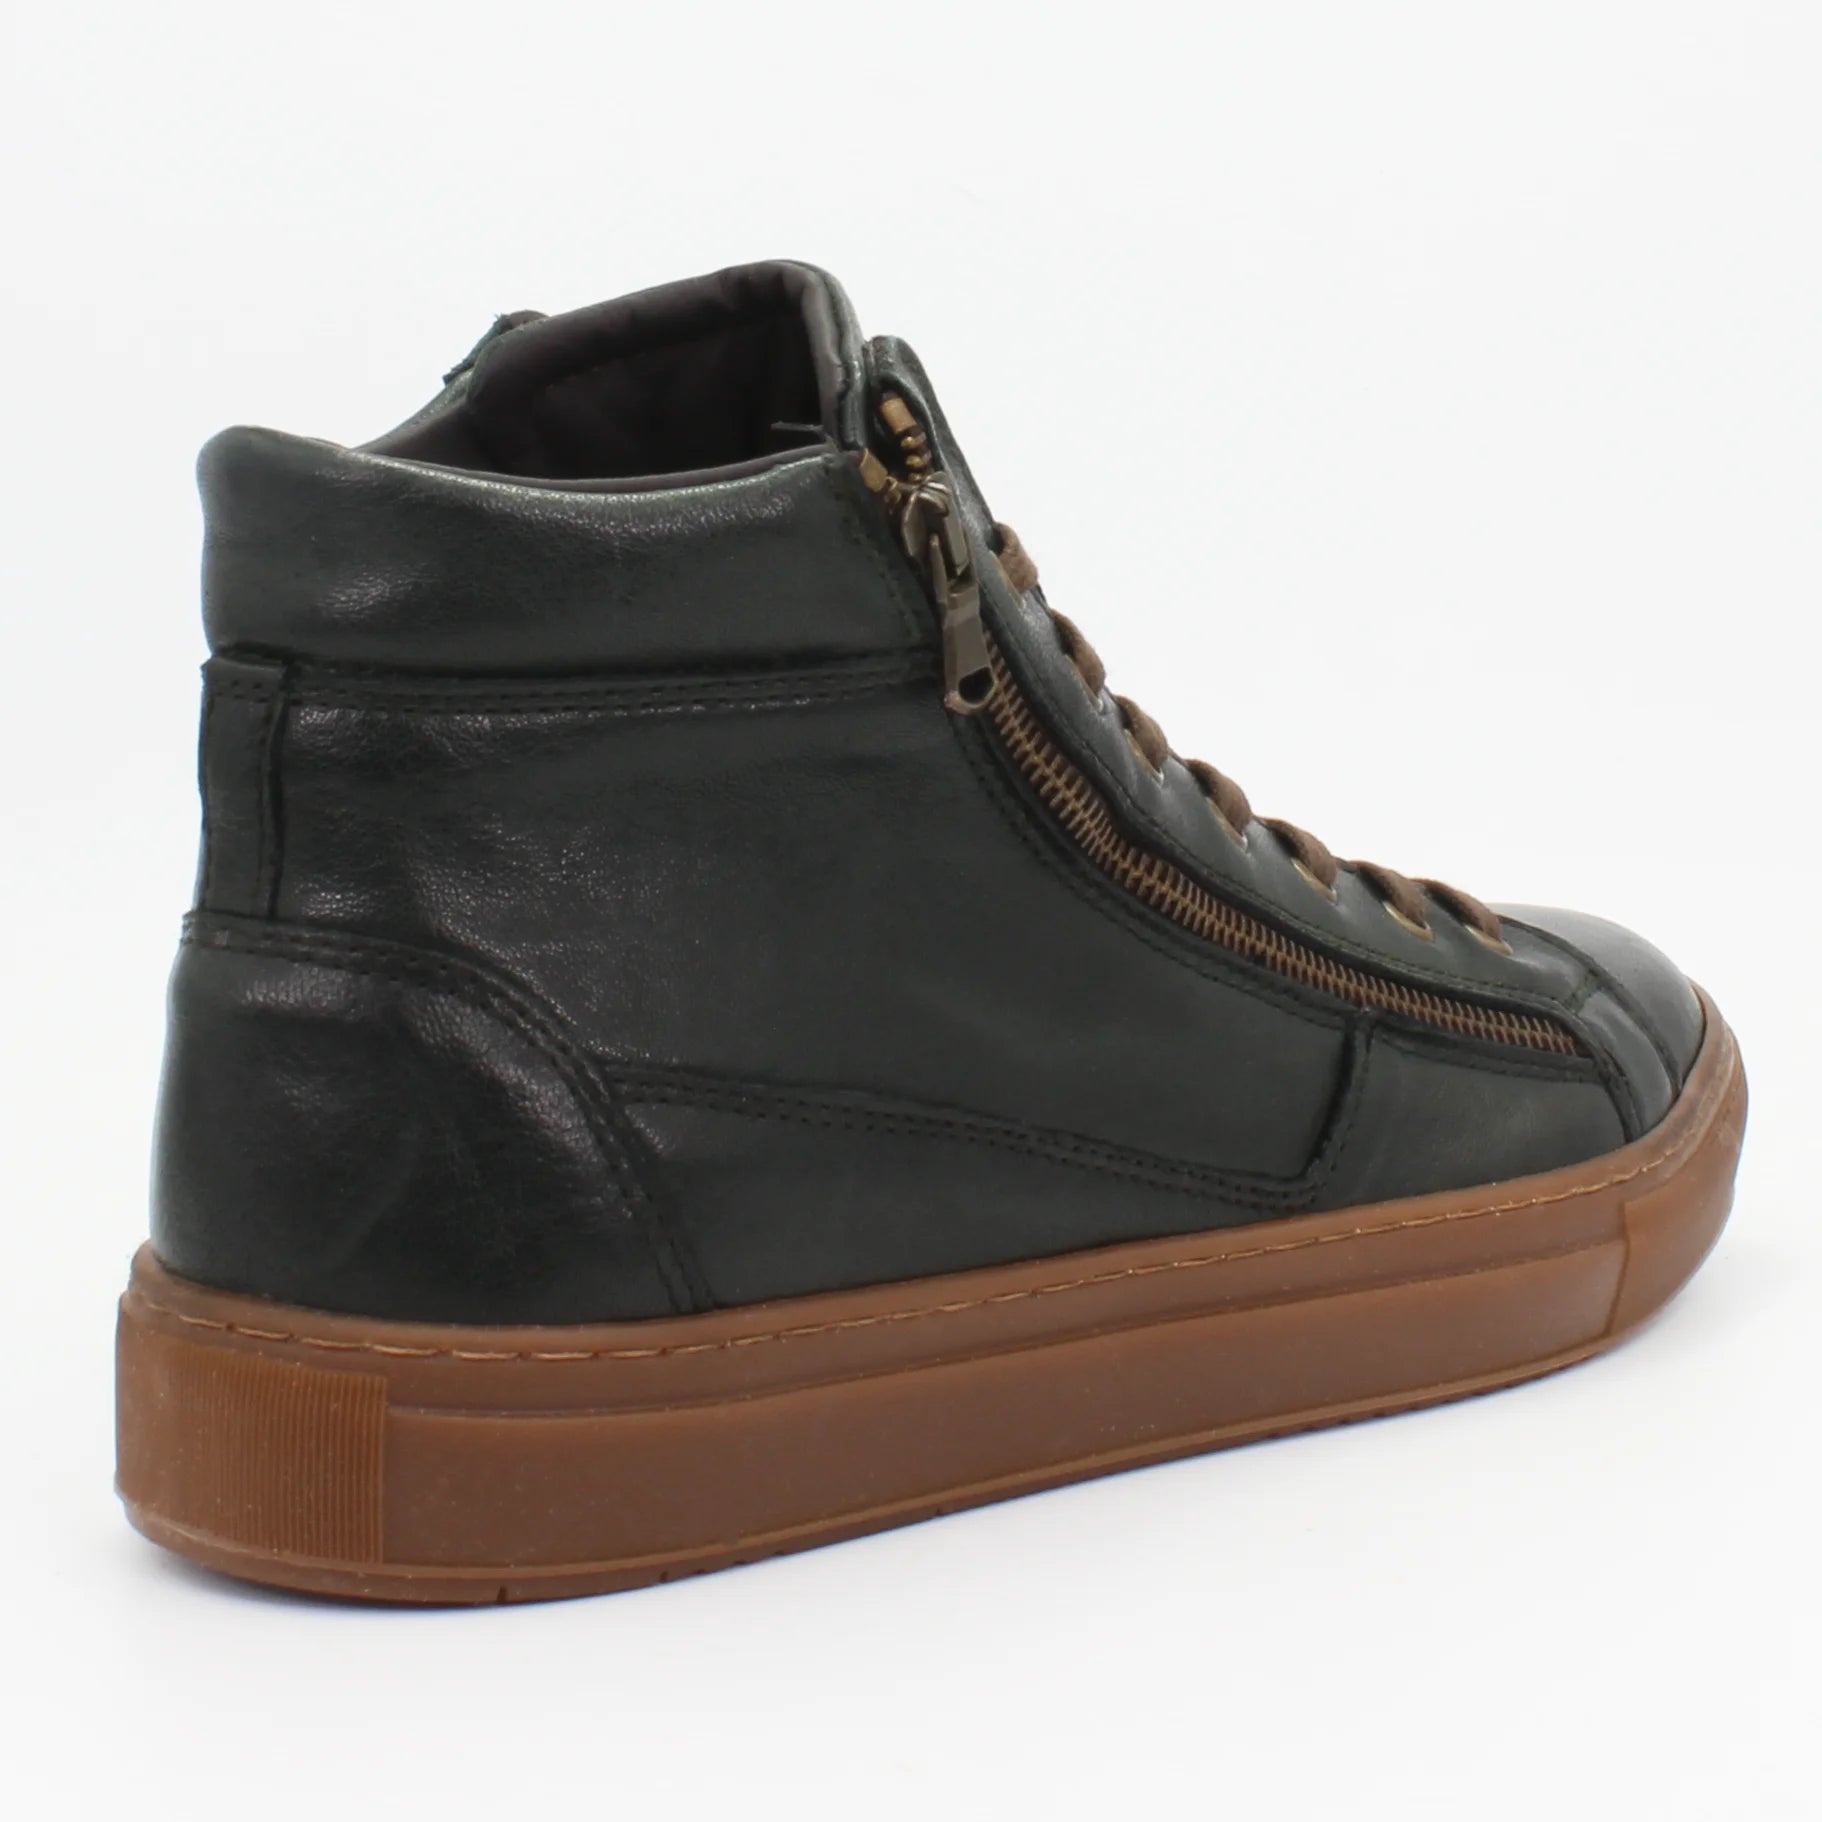 Shop Handmade Italian Leather High Top Sneaker in Verde (Cairo)  or browse our range of hand-made Italian shoes for men in leather or suede in-store at Aliverti Cape Town, or shop online. We deliver in South Africa & offer multiple payment plans as well as accept multiple safe & secure payment methods.